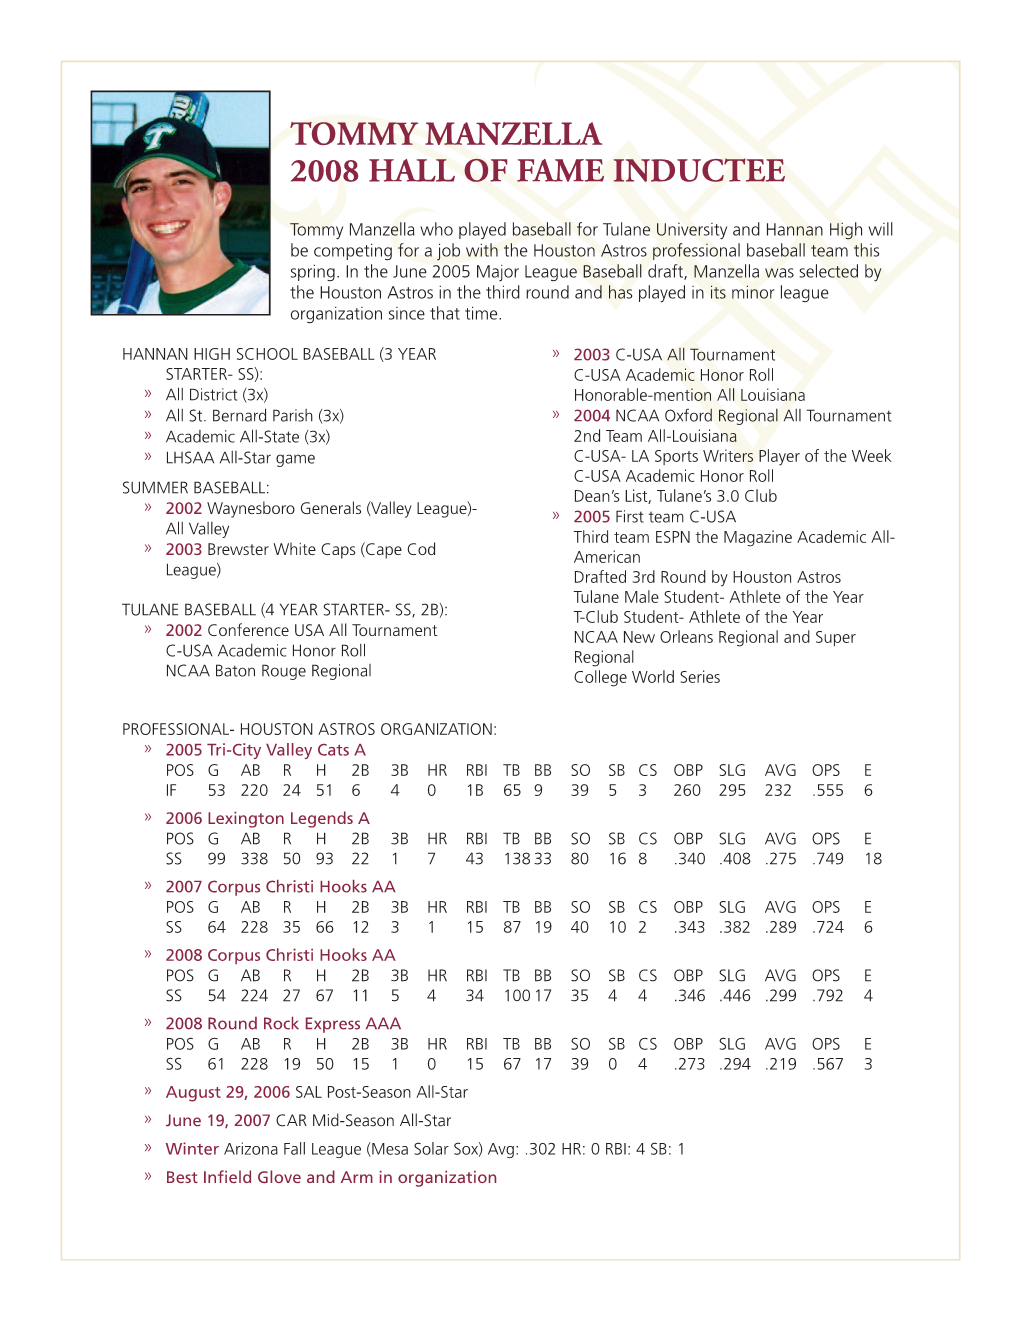 Tommy Manzella 2008 Hall of Fame Inductee